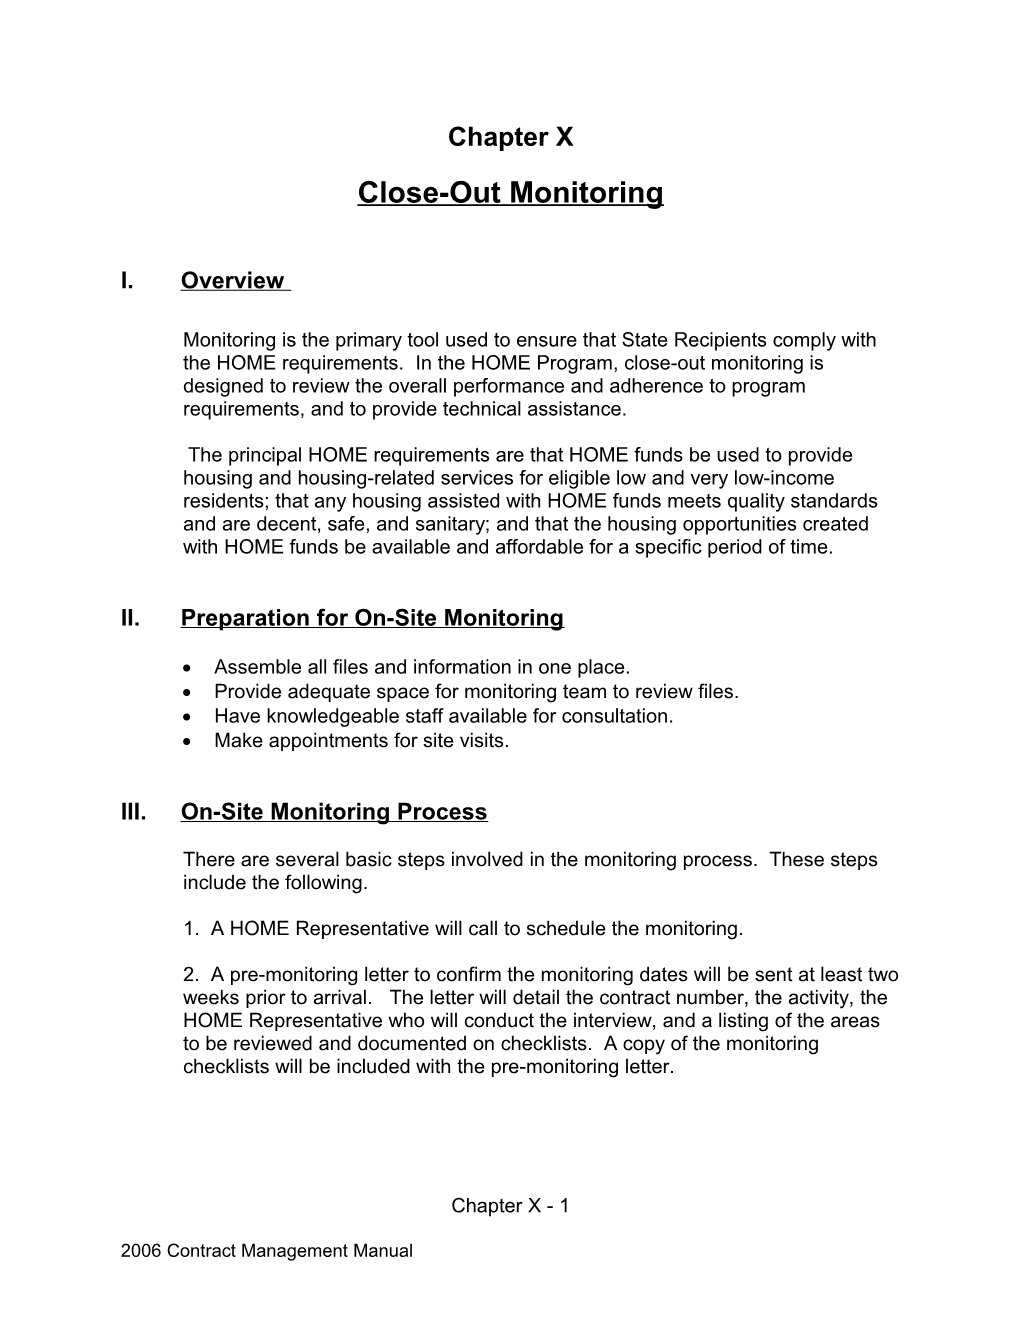 Close-Out Monitoring